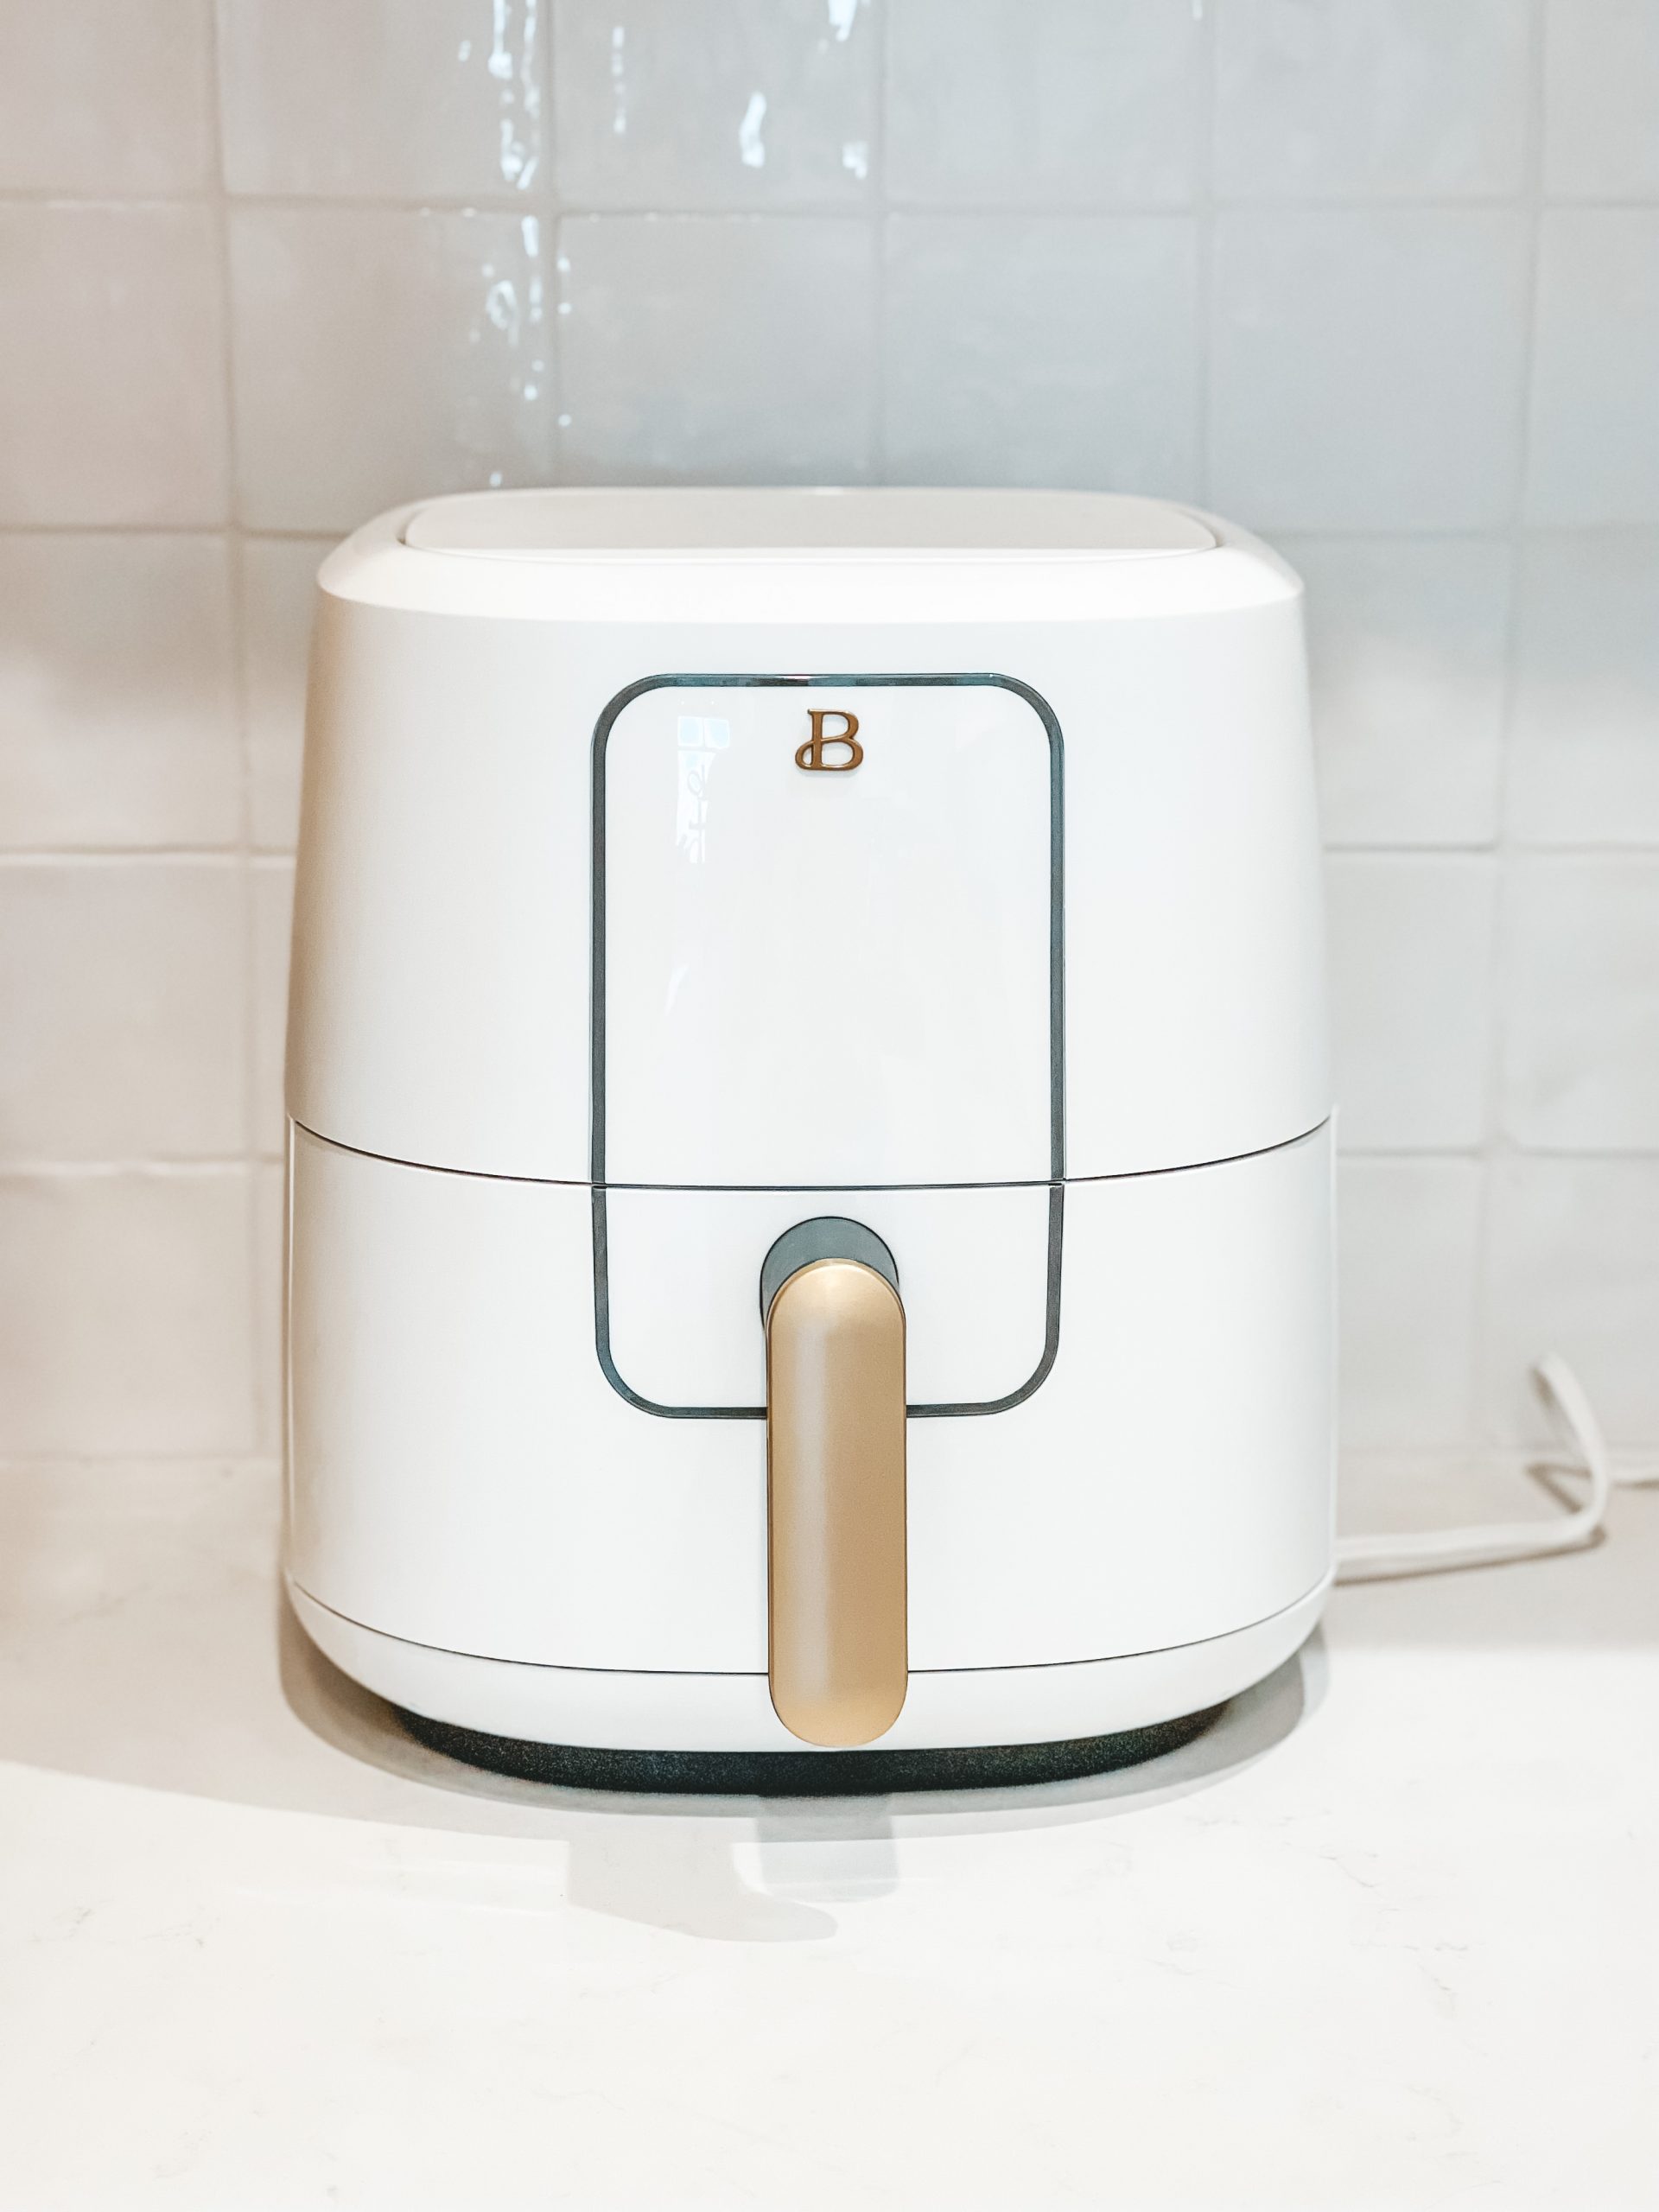 STUNNING White Air Fryers You Will Love!